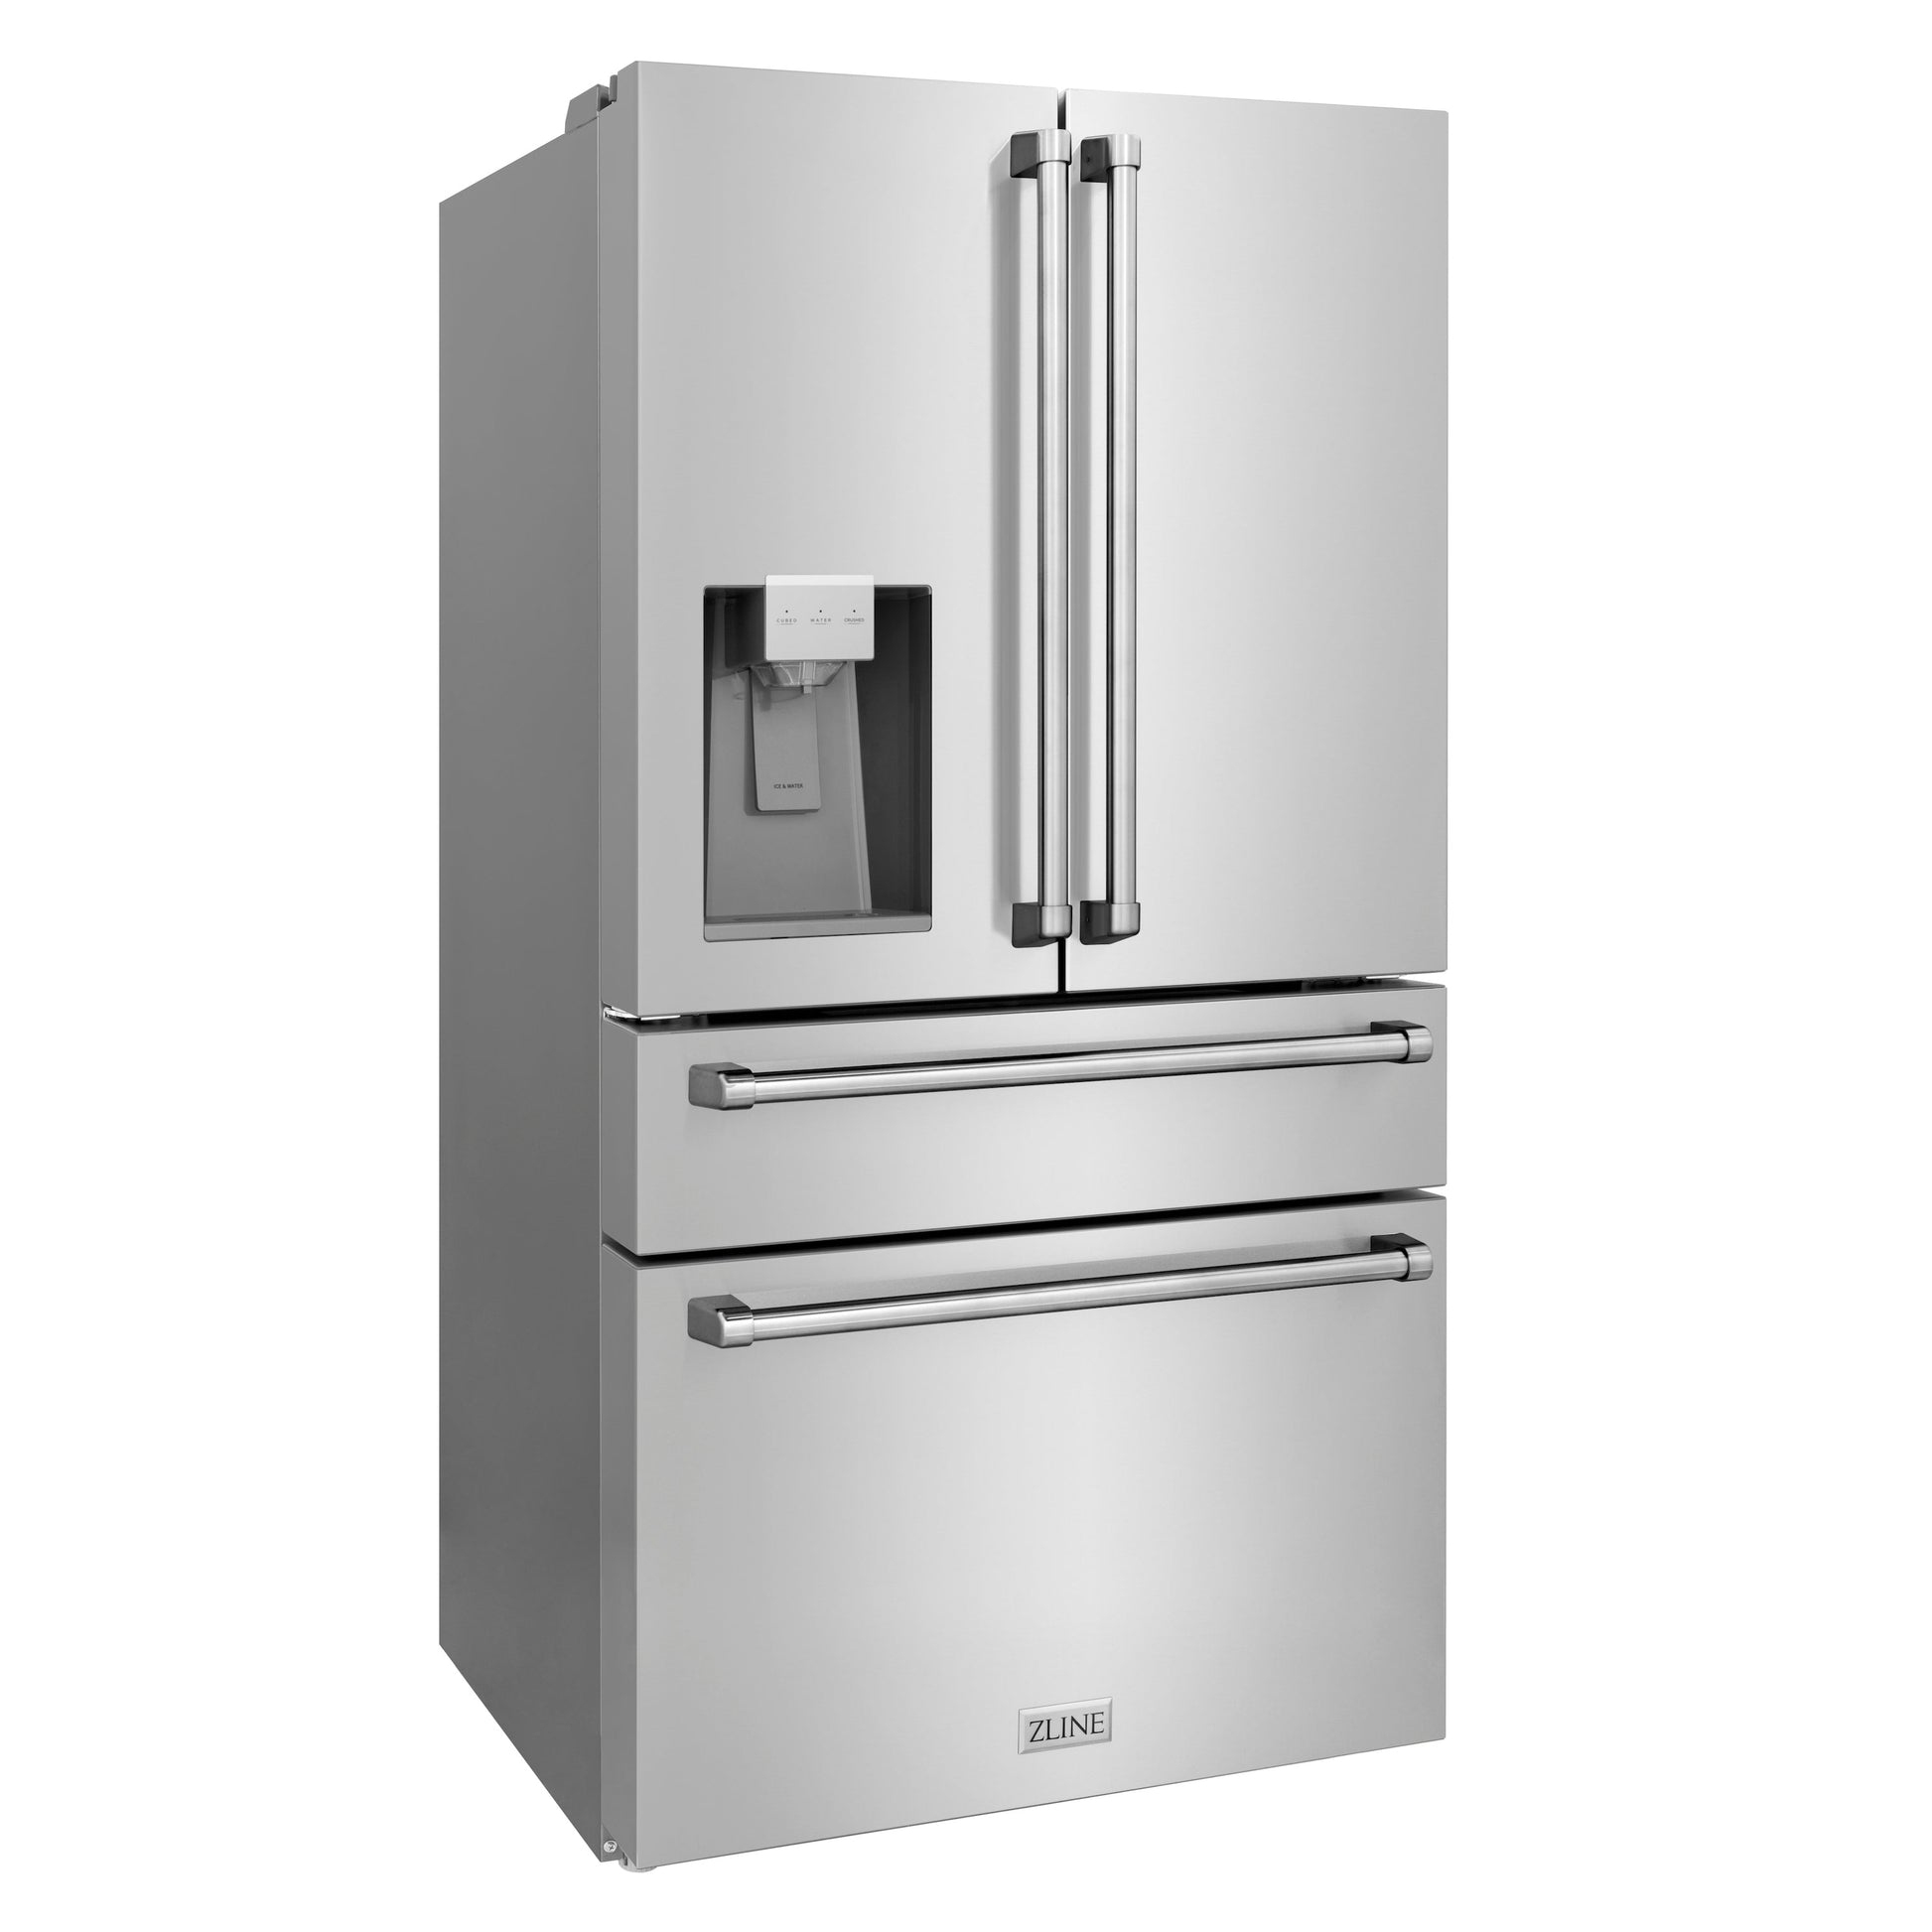 ZLINE 36 in. 21.6 cu. ft Freestanding French Door Fingerprint Resistant Refrigerator with External Water and Ice Dispenser in Stainless Steel (RFM-W-36) side, closed.